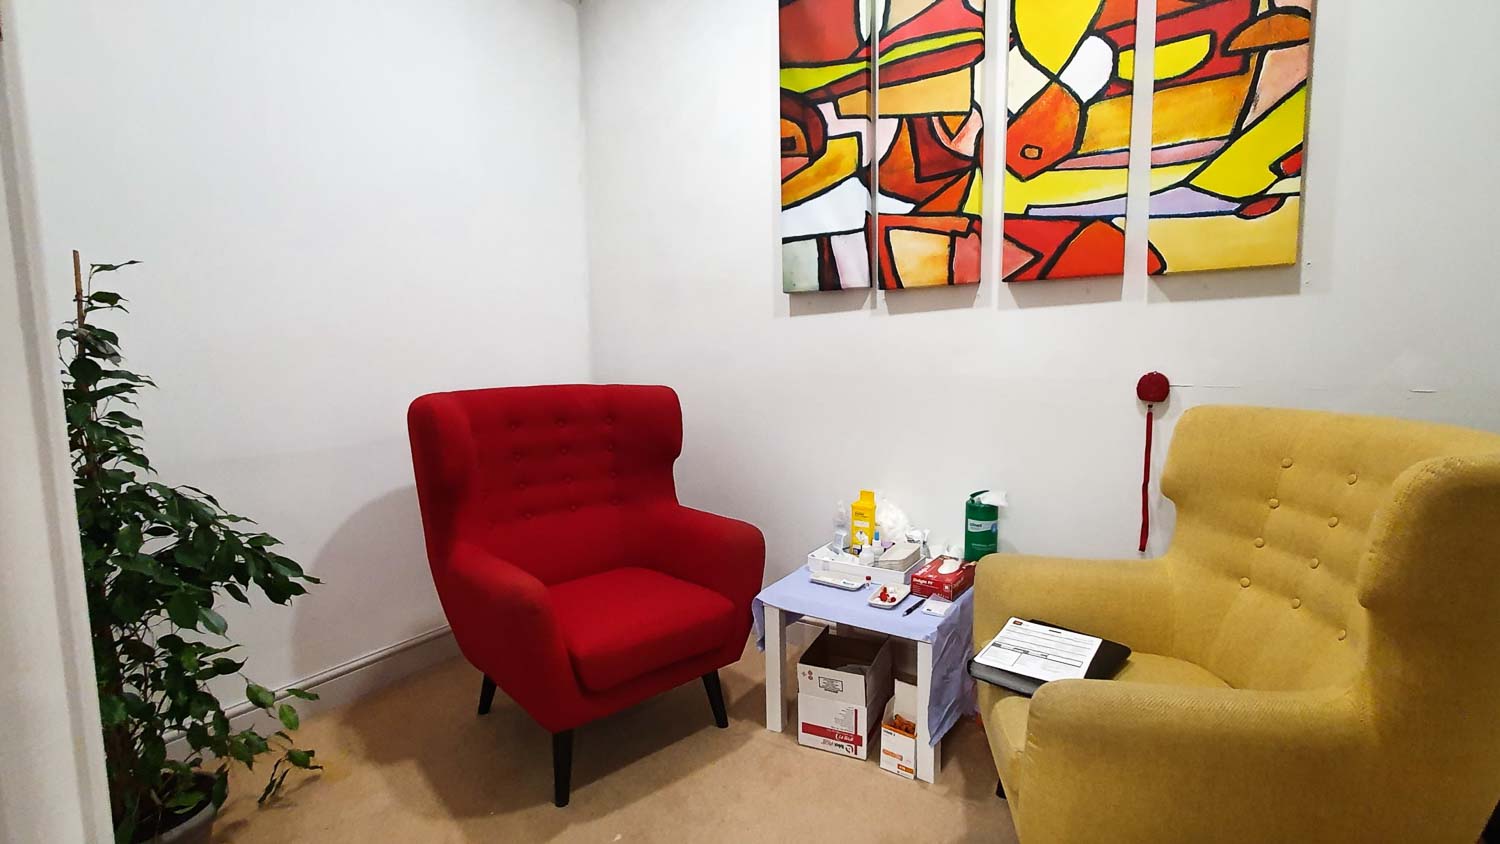 Our HIV testing room in Croydon